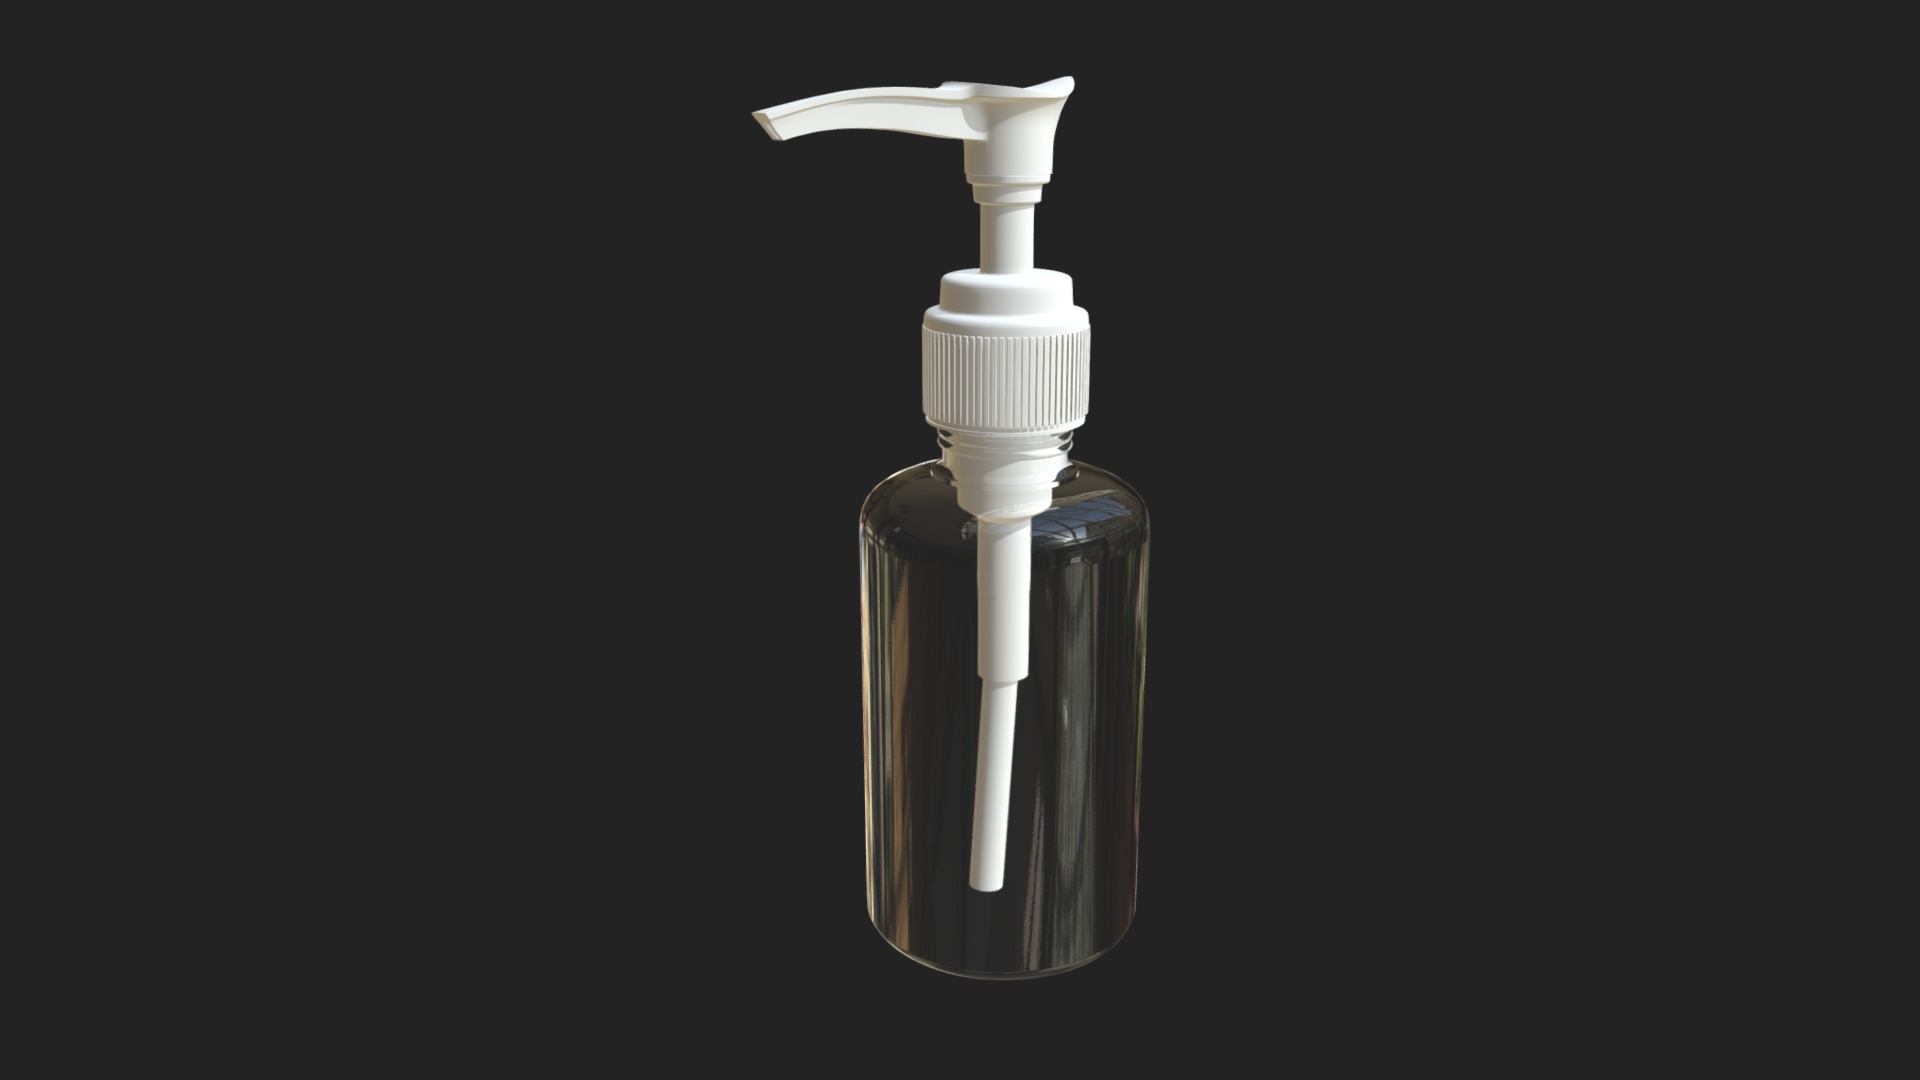 3D model Travel soap dispenser - This is a 3D model of the Travel soap dispenser. The 3D model is about a light bulb with a white cap.